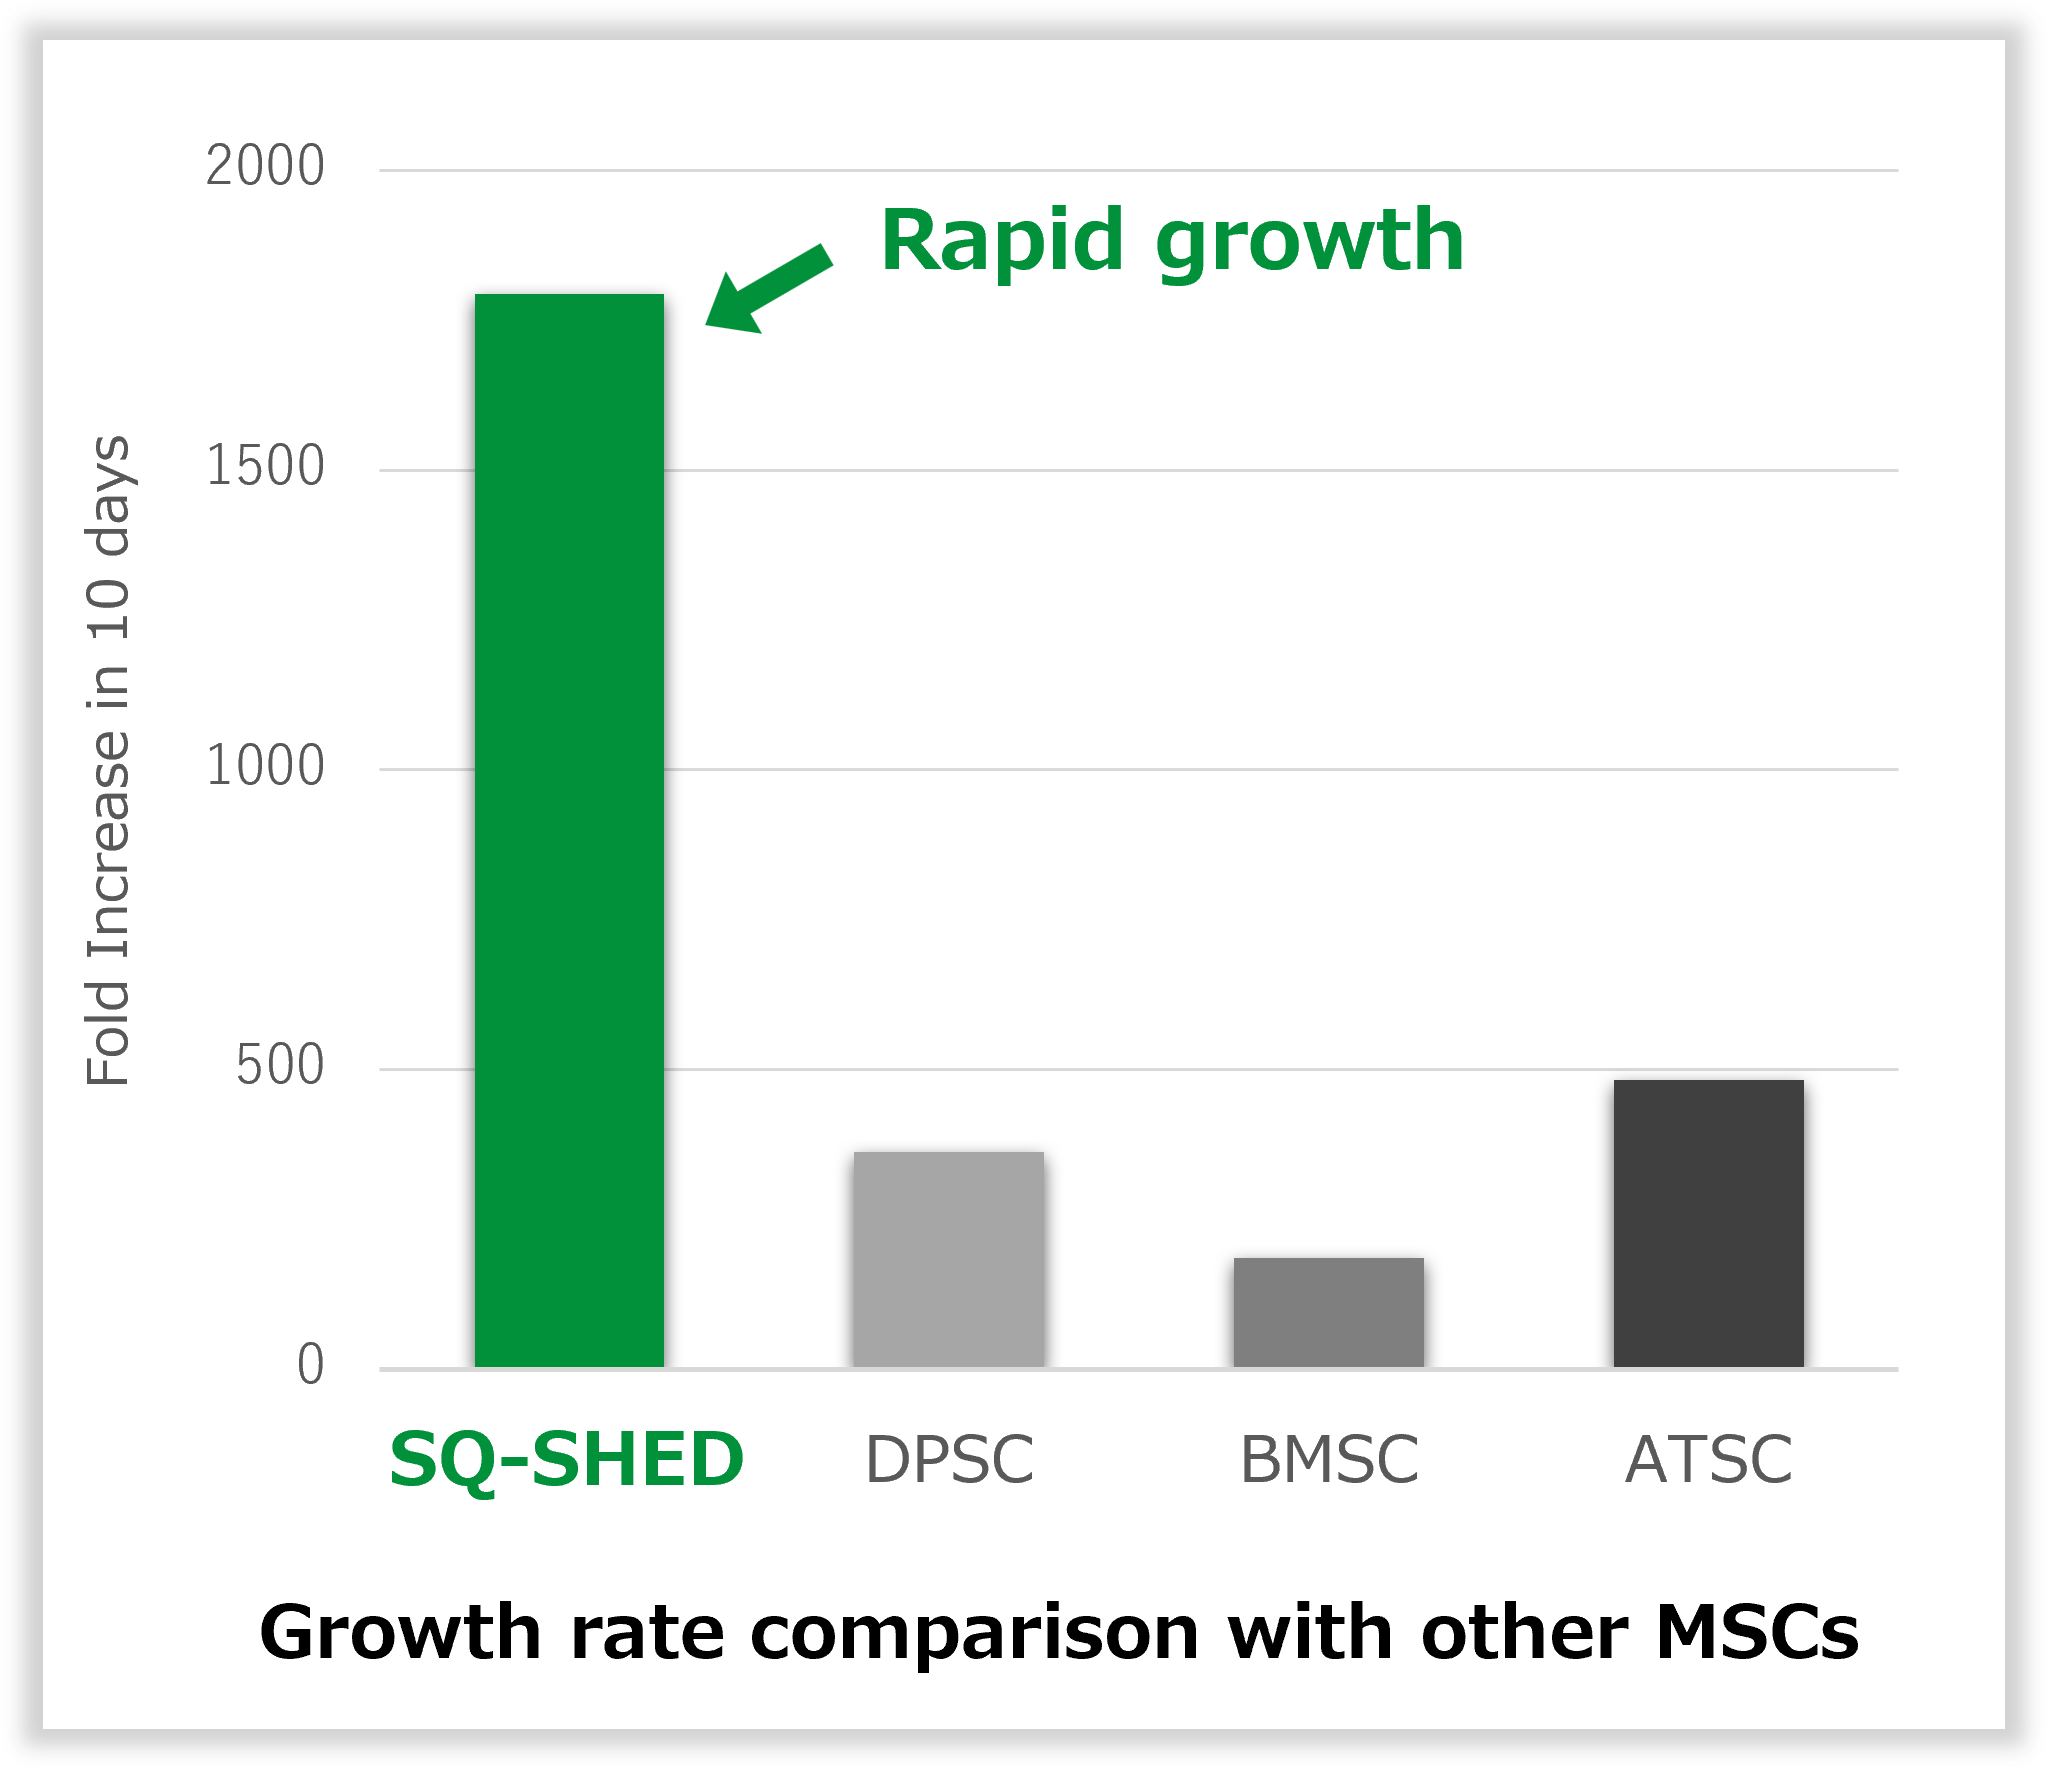 Geowth rate comparison with other MSCs